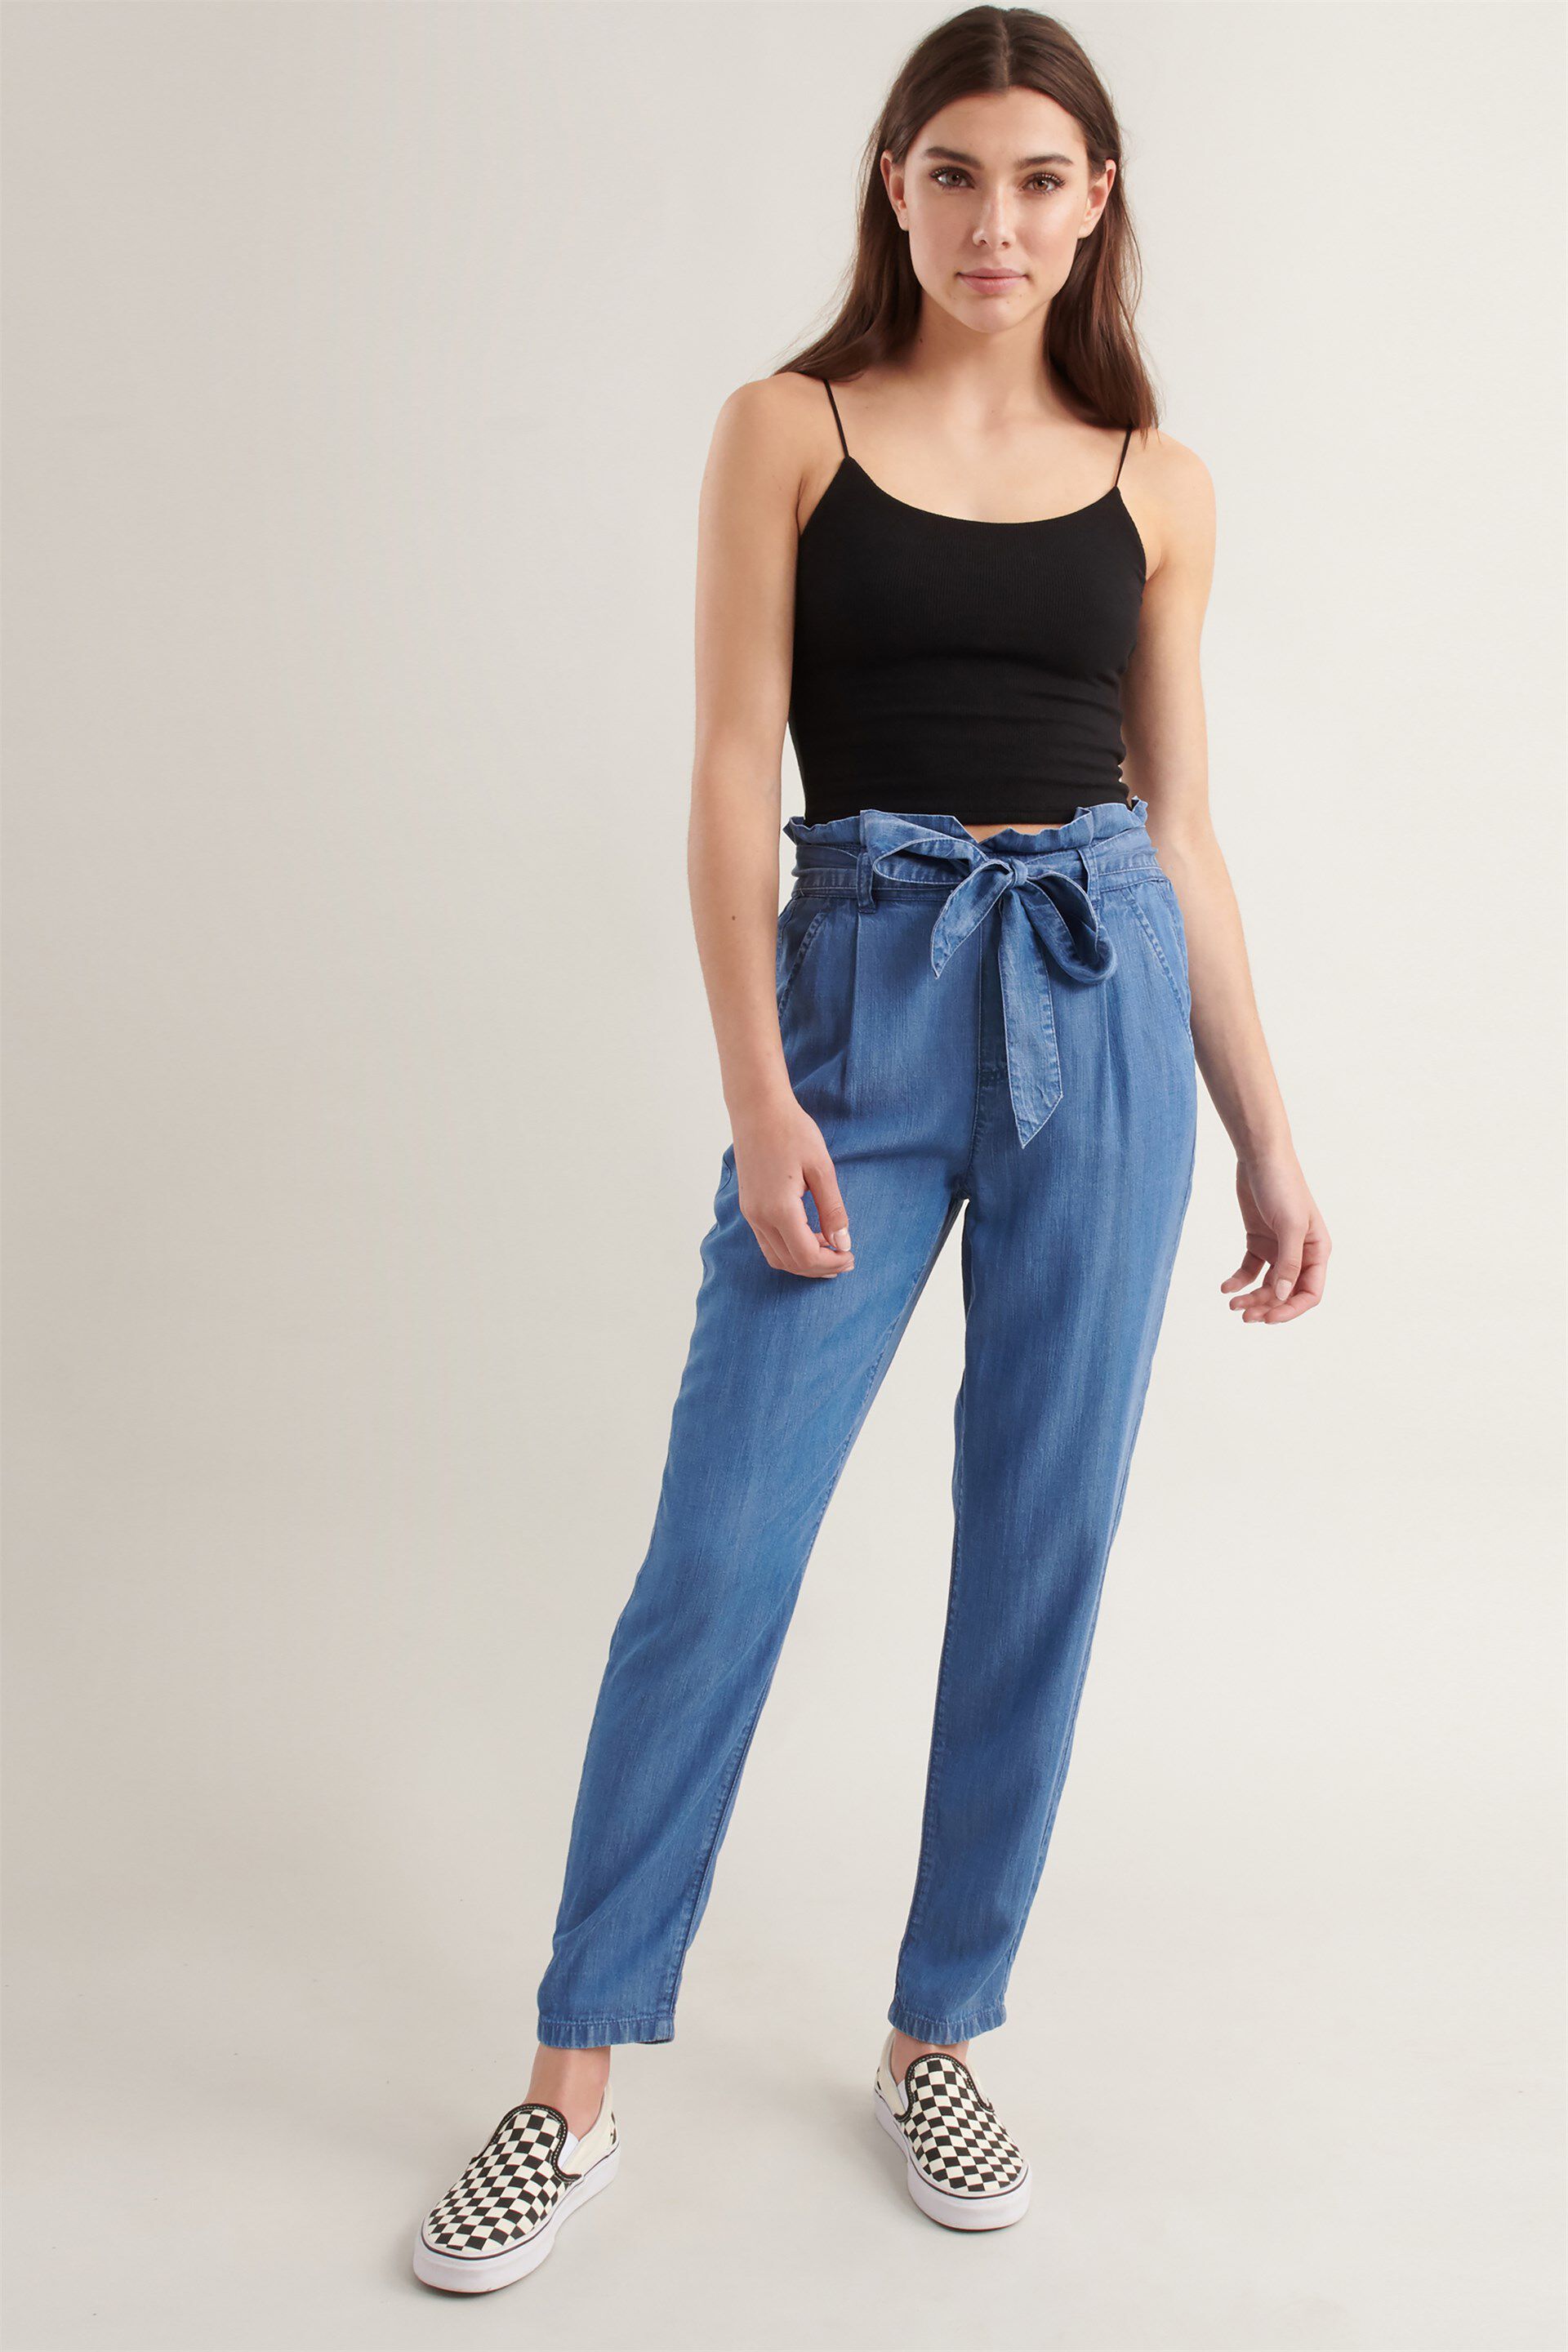 size 6 high waisted jeans